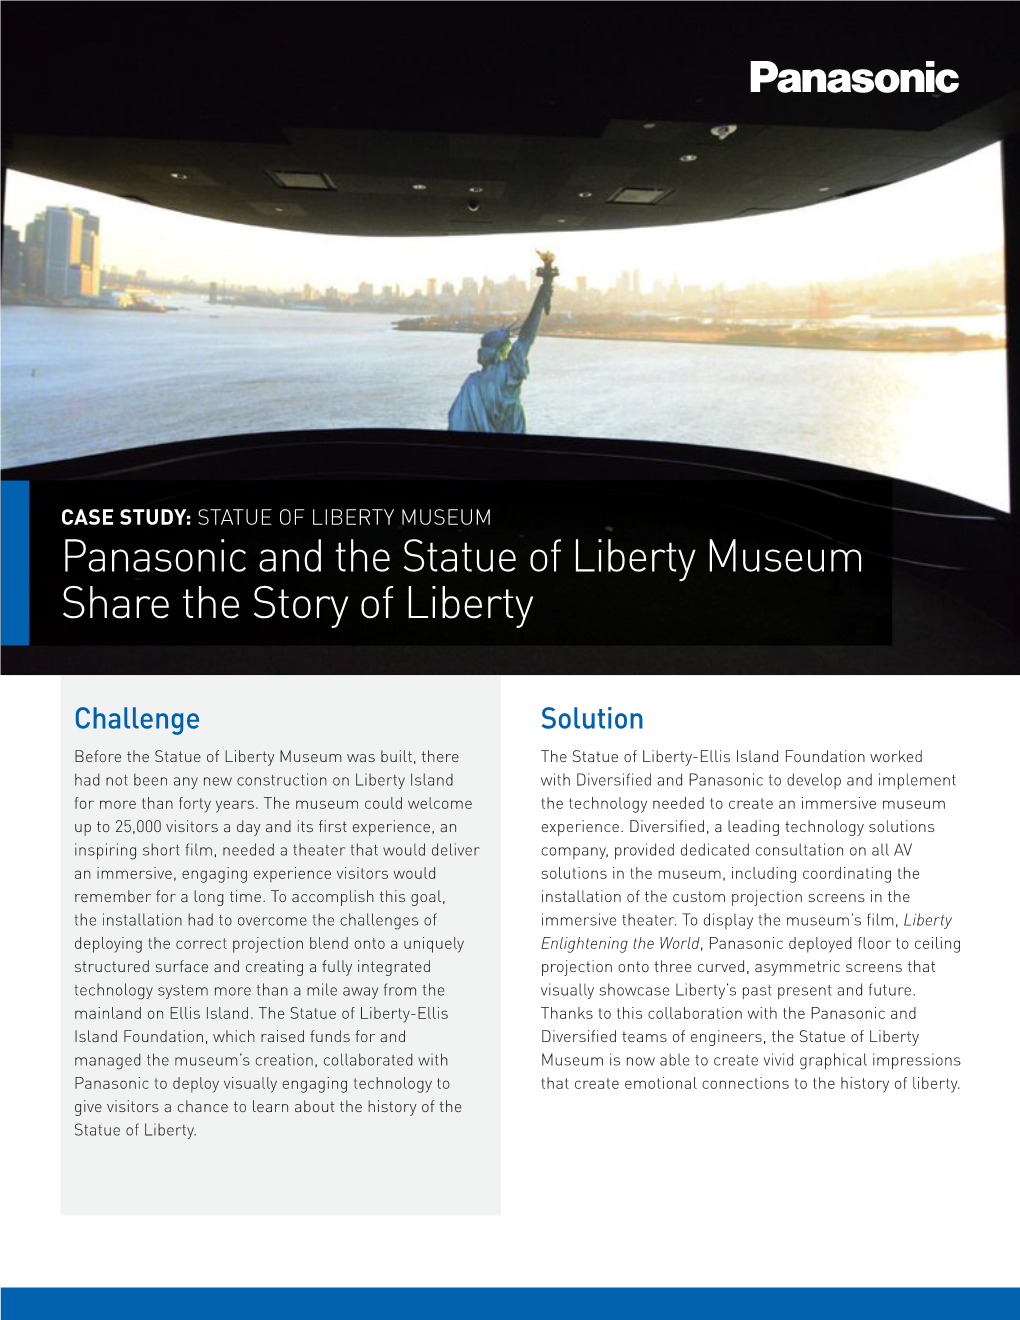 Panasonic and the Statue of Liberty Museum Share the Story of Liberty